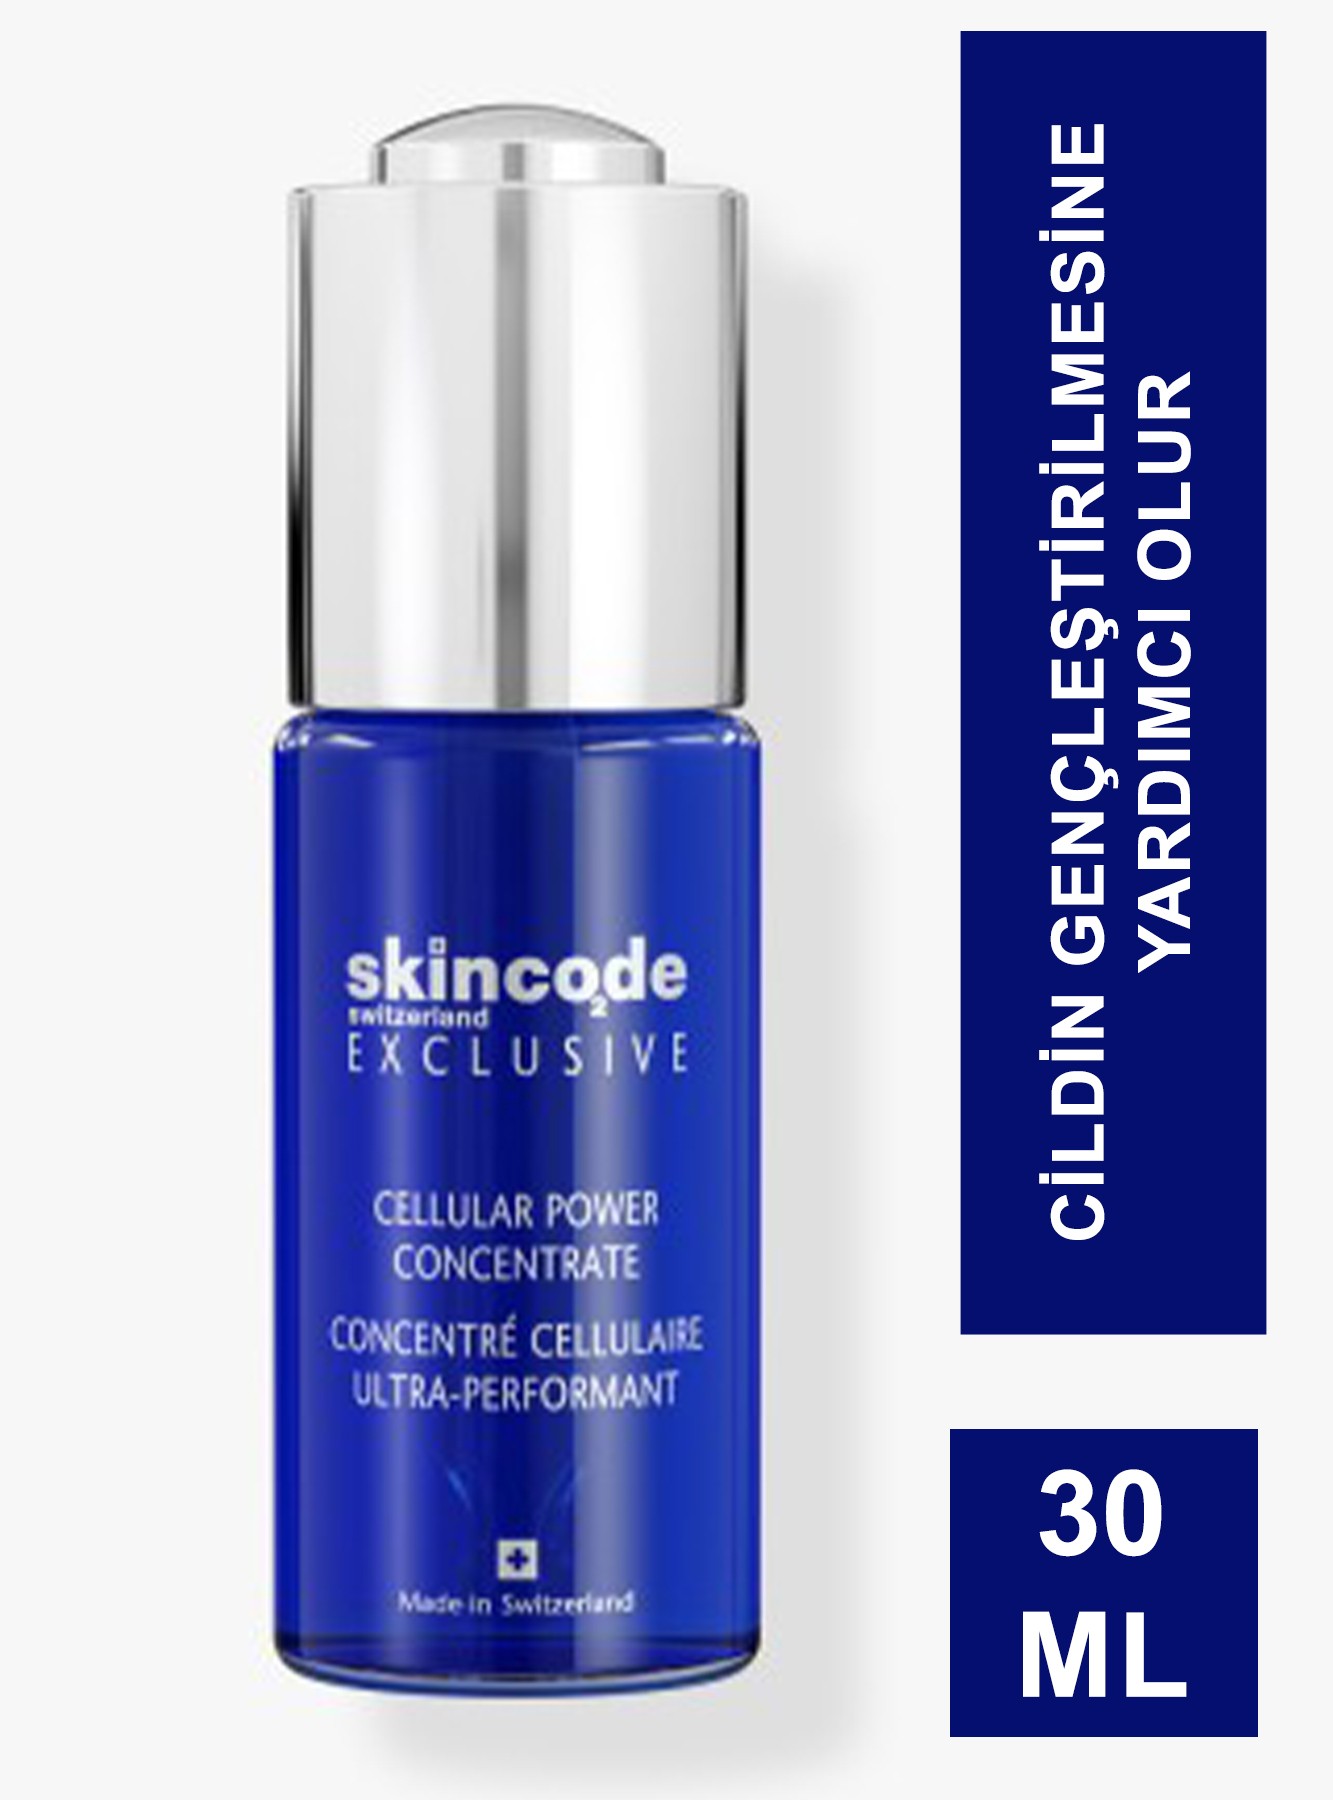 Outlet - Skincode Cellular Power Concentrate 30ml